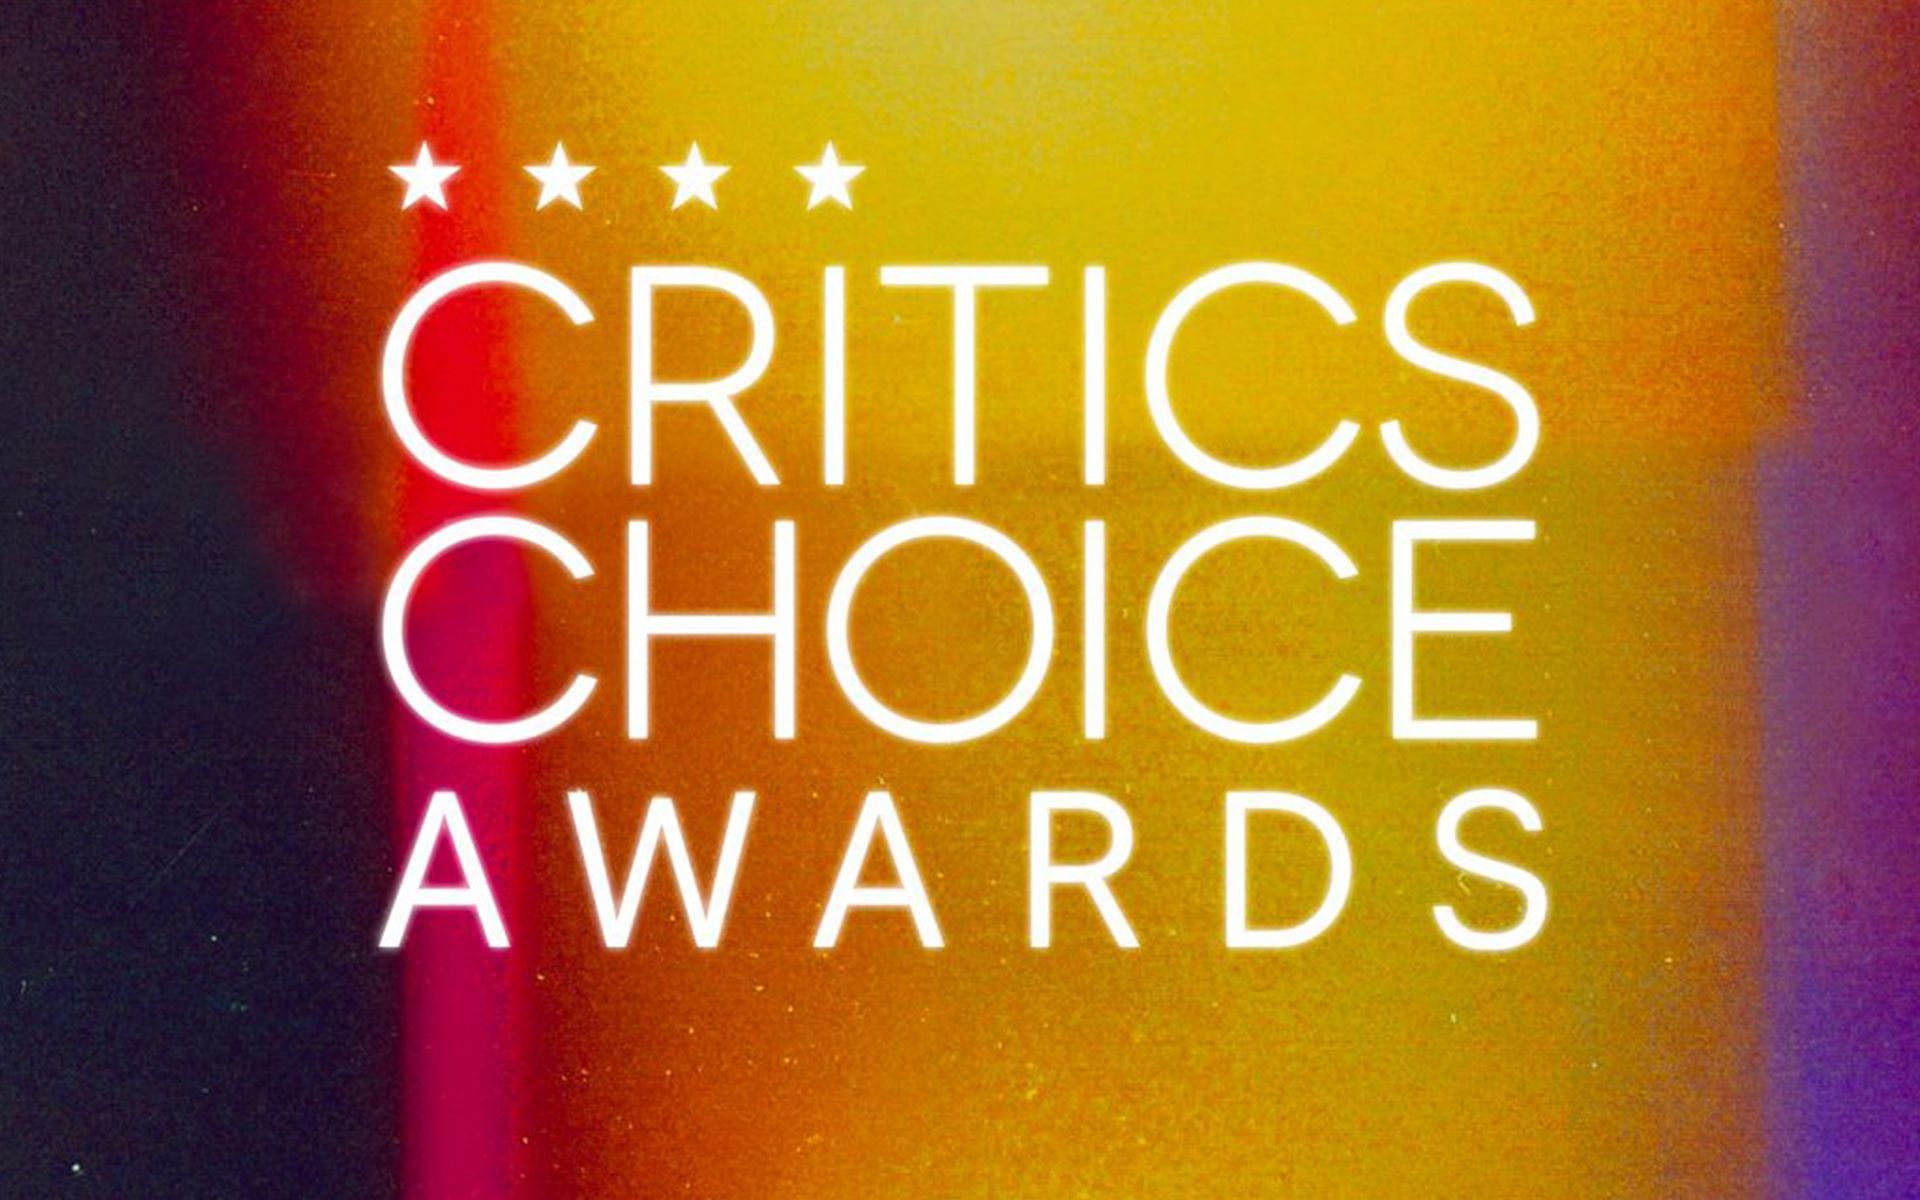 The Critics Choice Awards will be held simultaneously in London and Los Angeles (Image via @criticschoice/ Instagram)